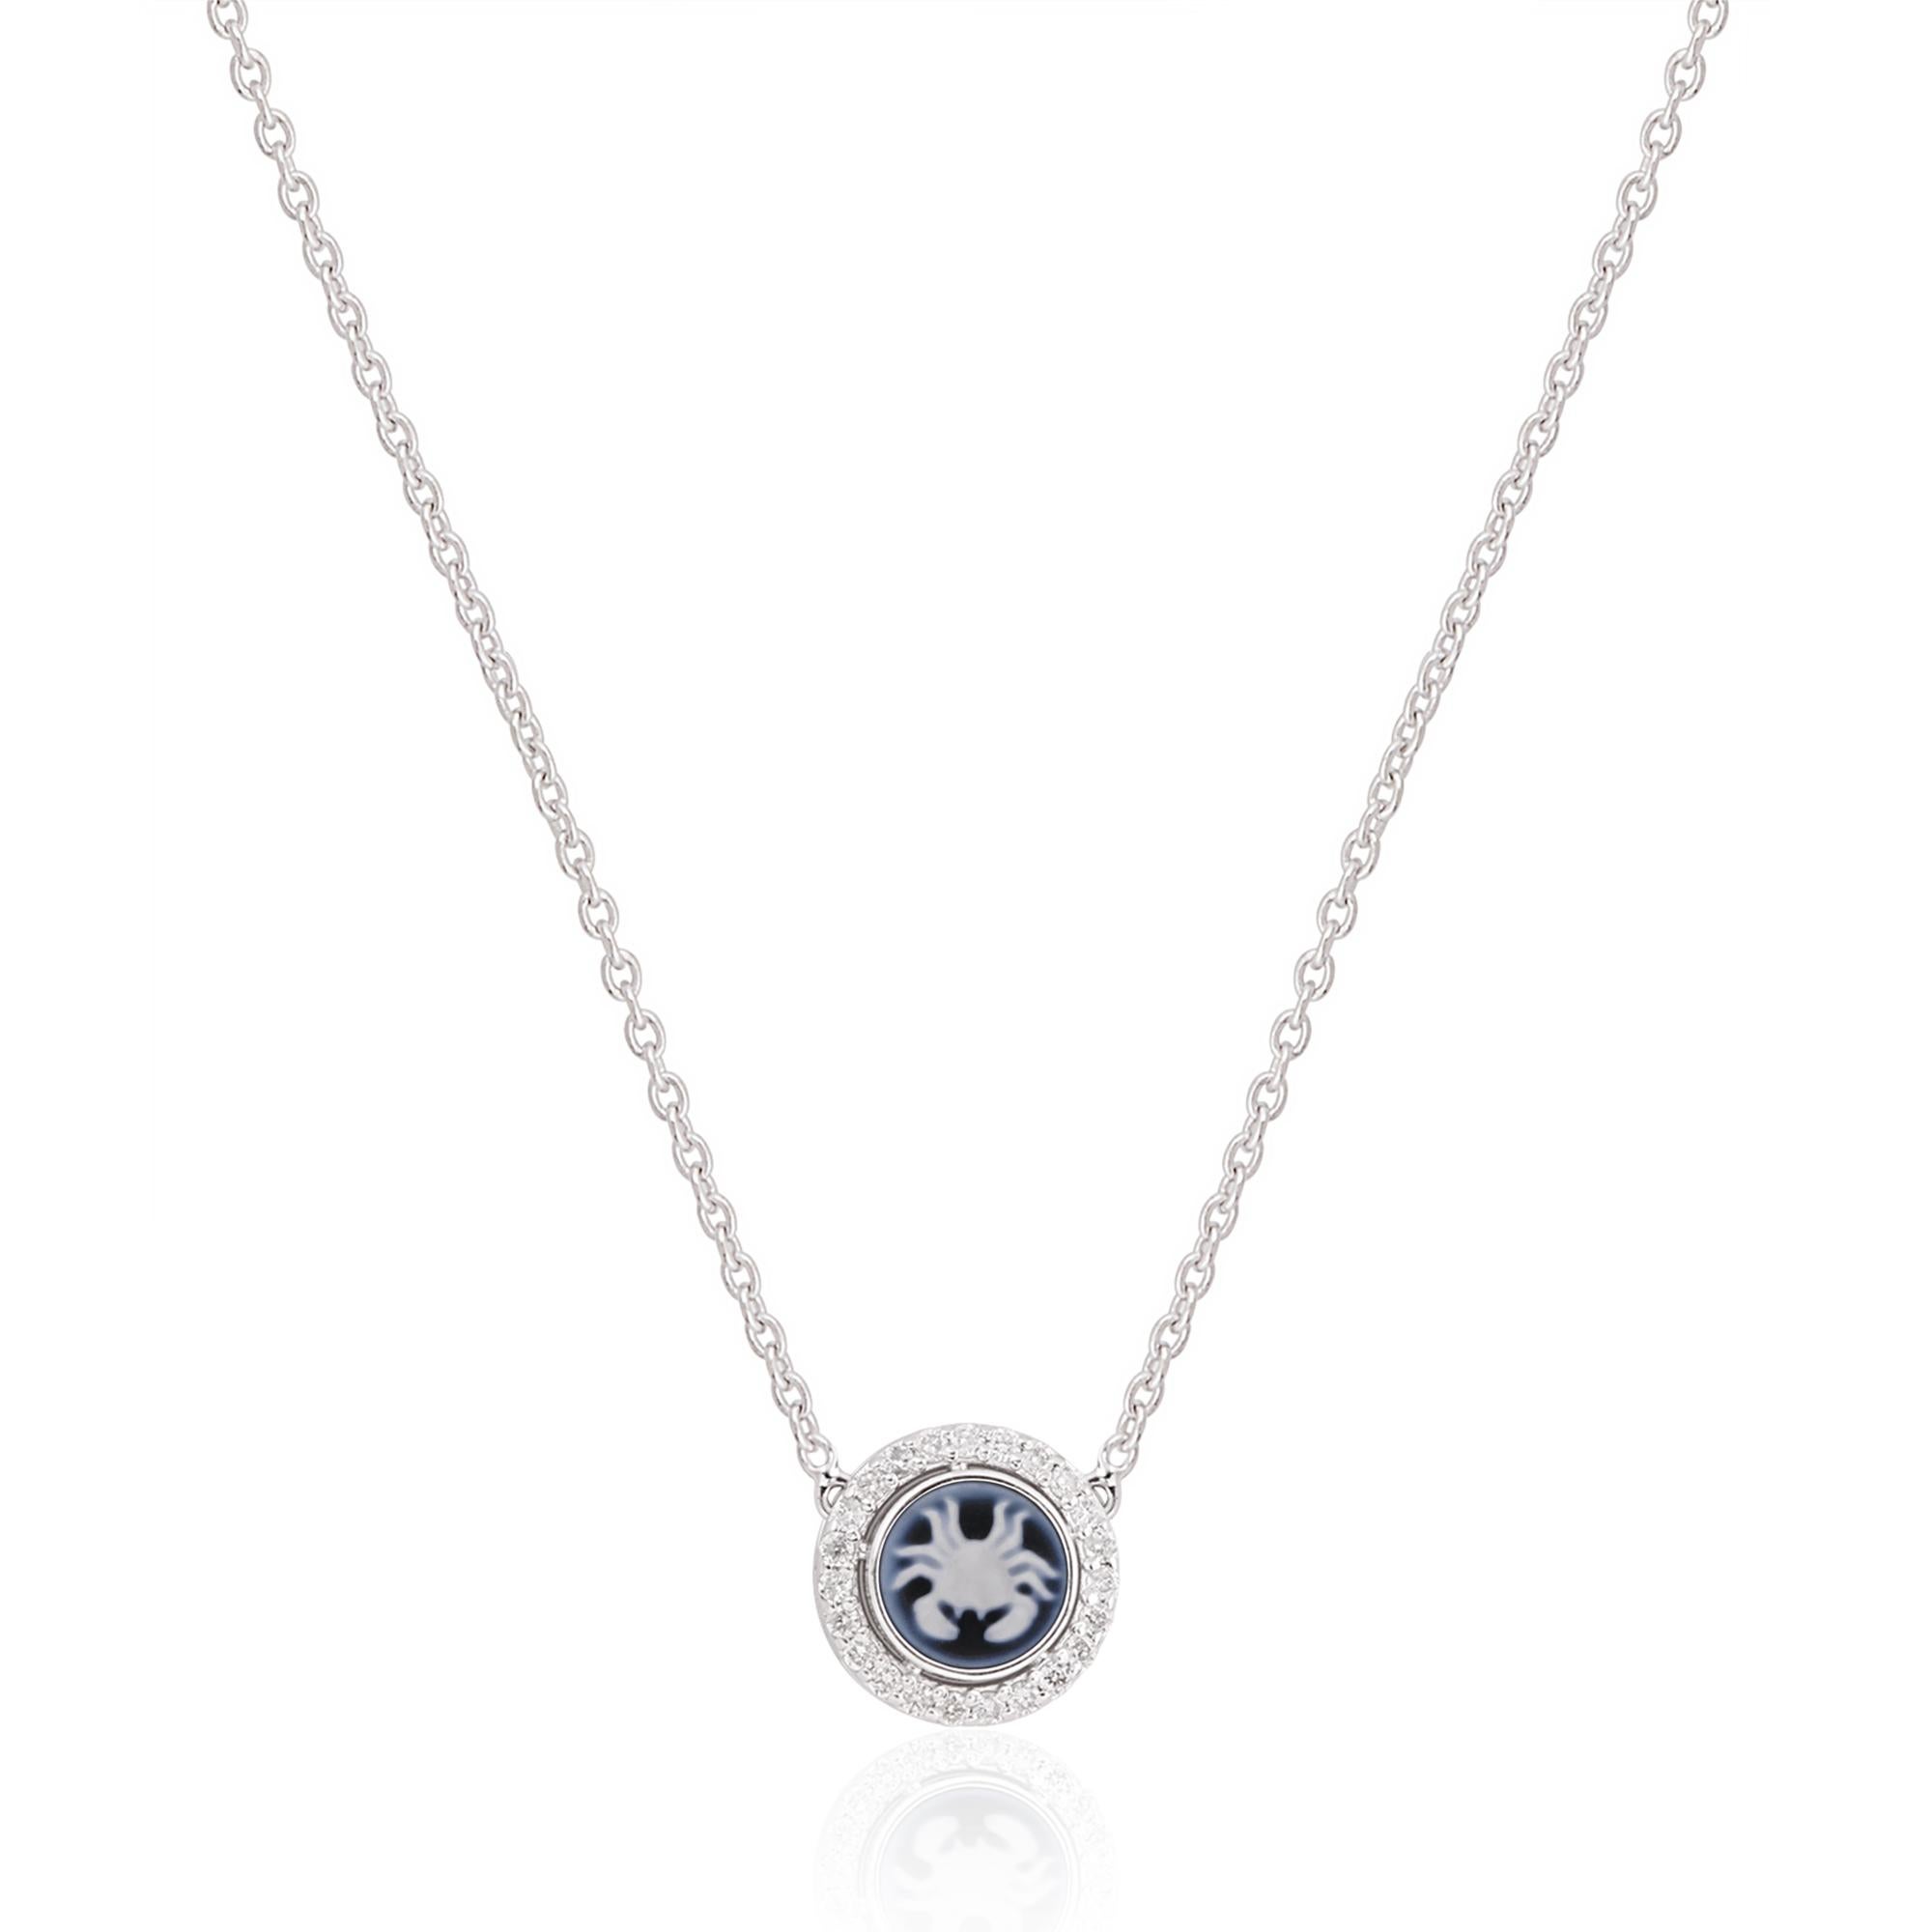 The centerpiece of this necklace is the Cancer zodiac sign pendant, meticulously designed to capture the essence of this nurturing and emotional astrological symbol. The pendant showcases the iconic crab, symbolizing the Cancer's deep intuition and